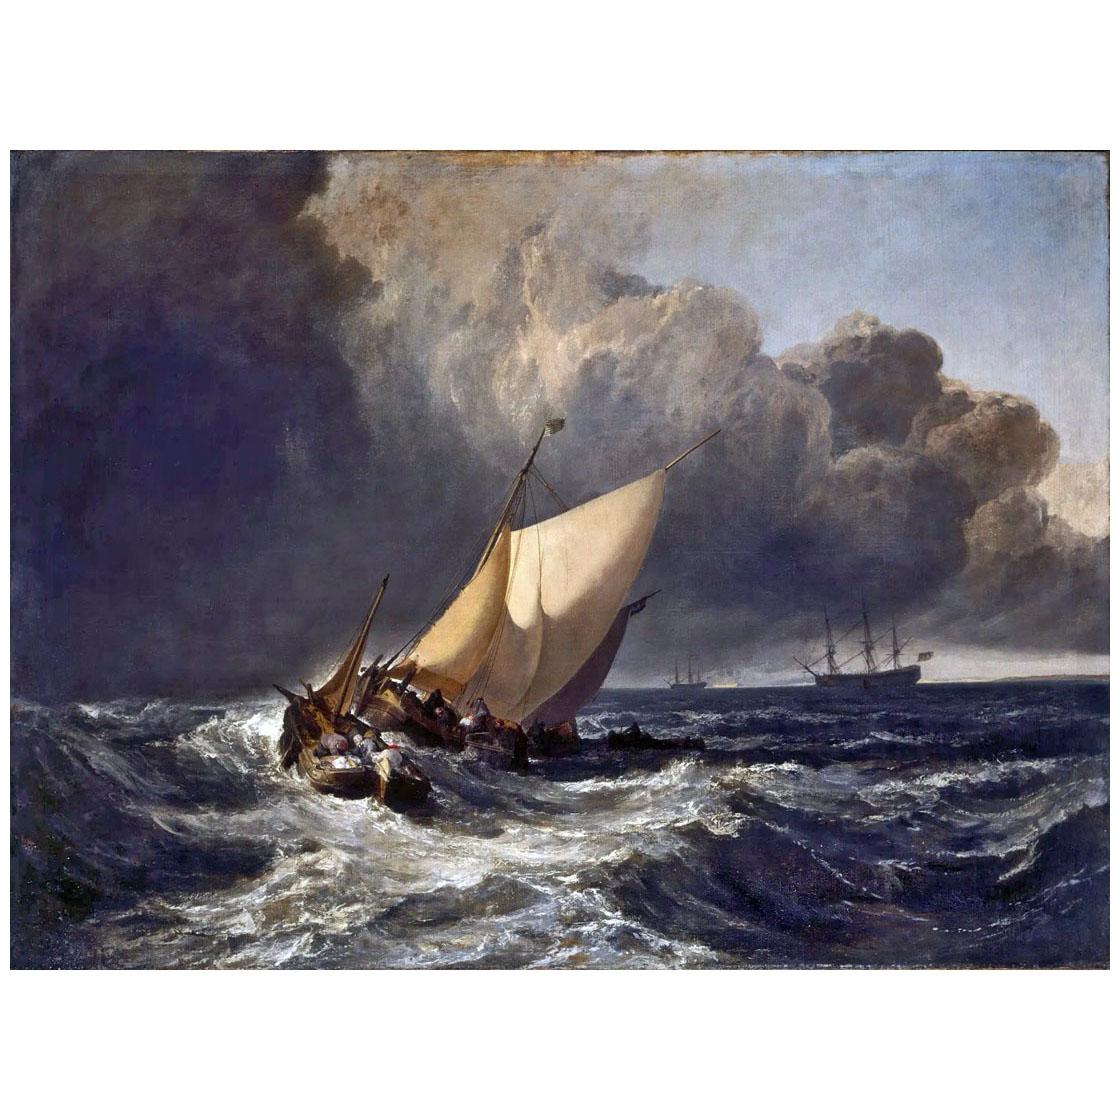 William Turner. Dutch Fisher Boats at the Storm. 1801. National Gallery London